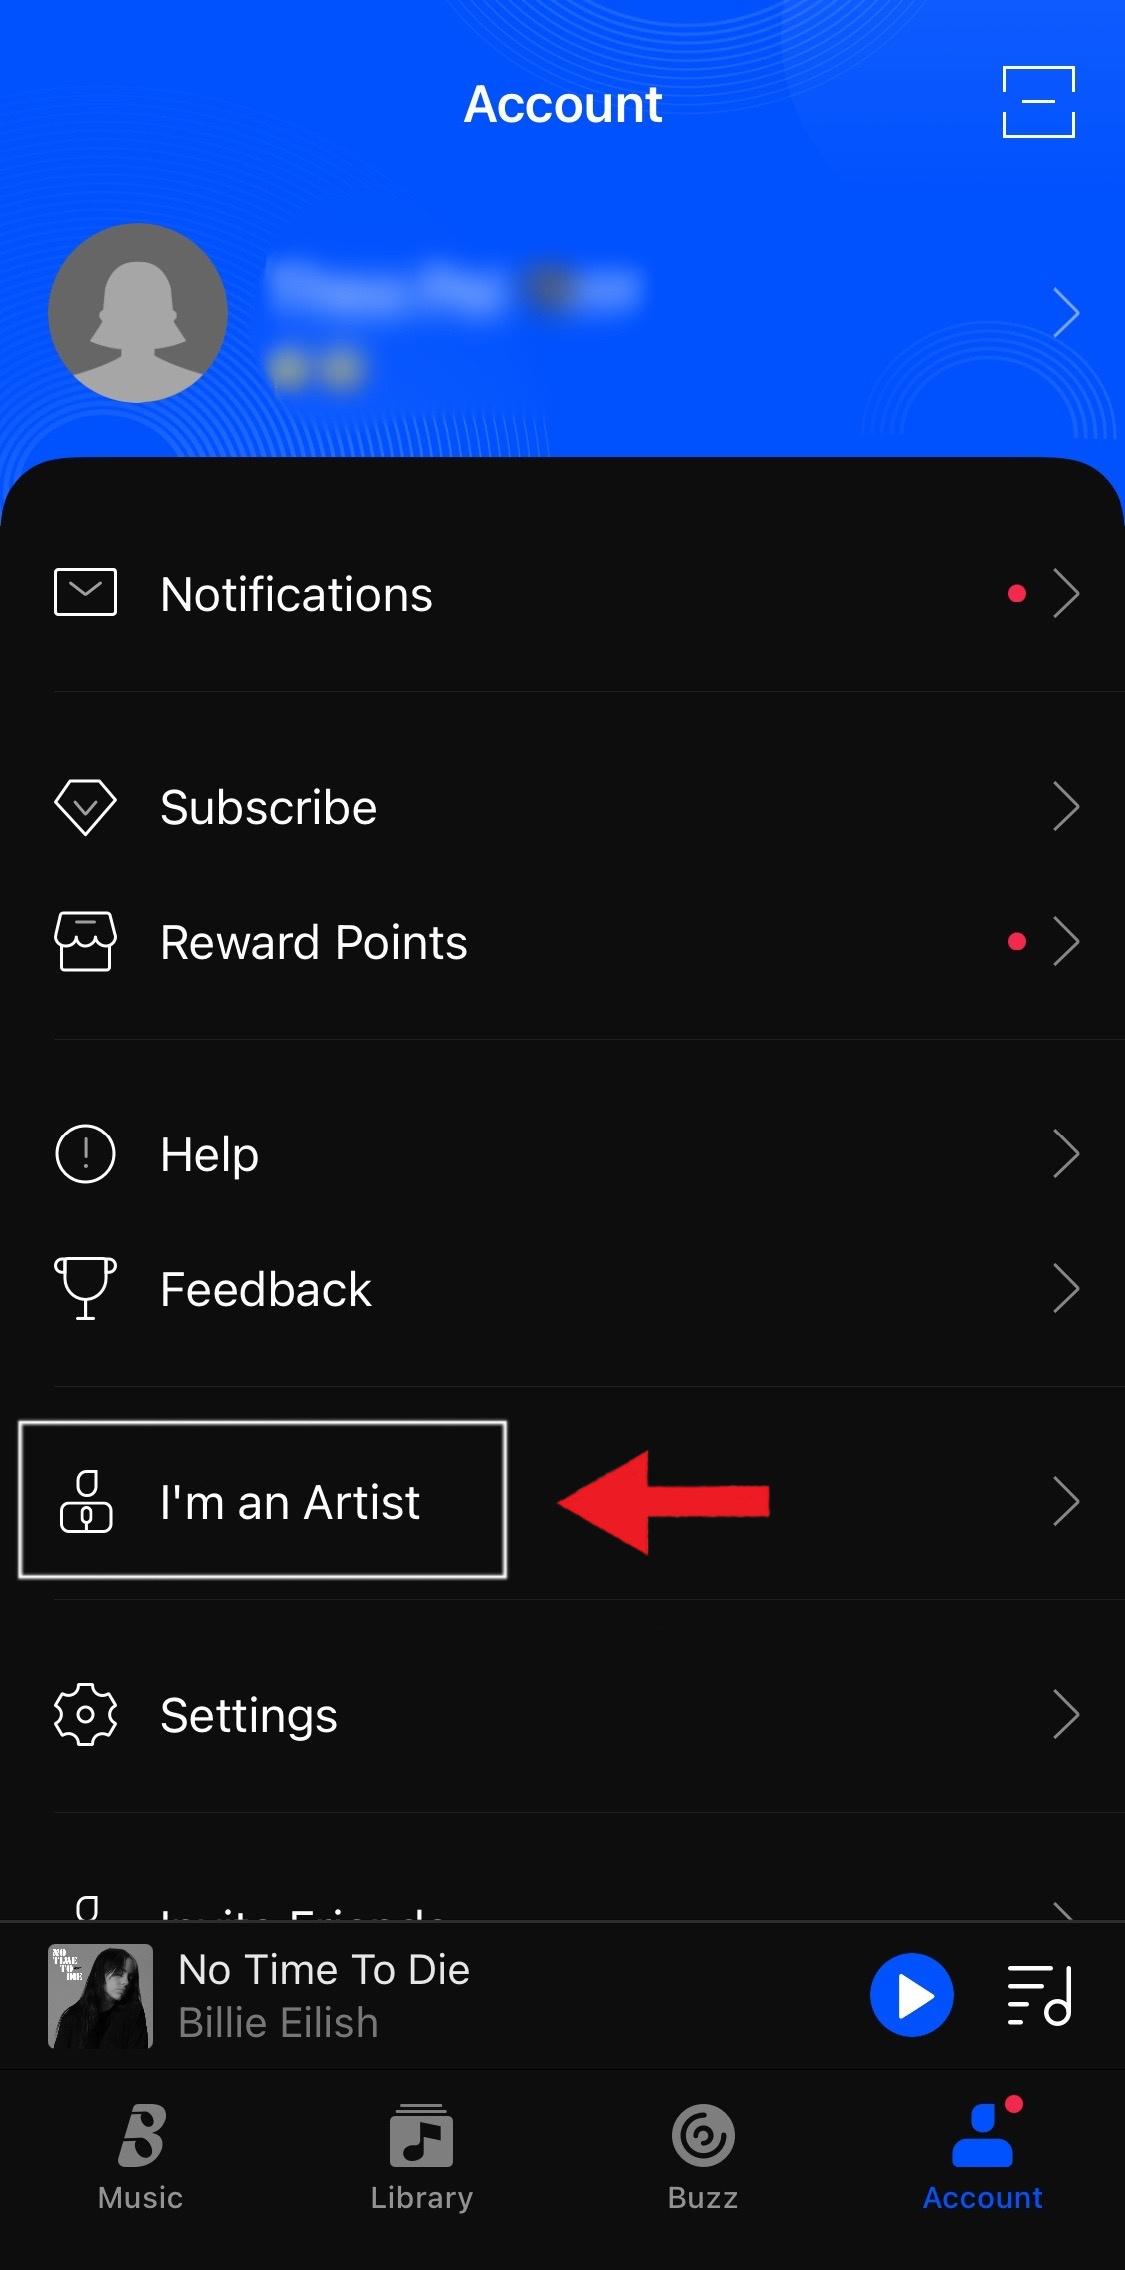 For Artists: How to get verified on Boomplay?